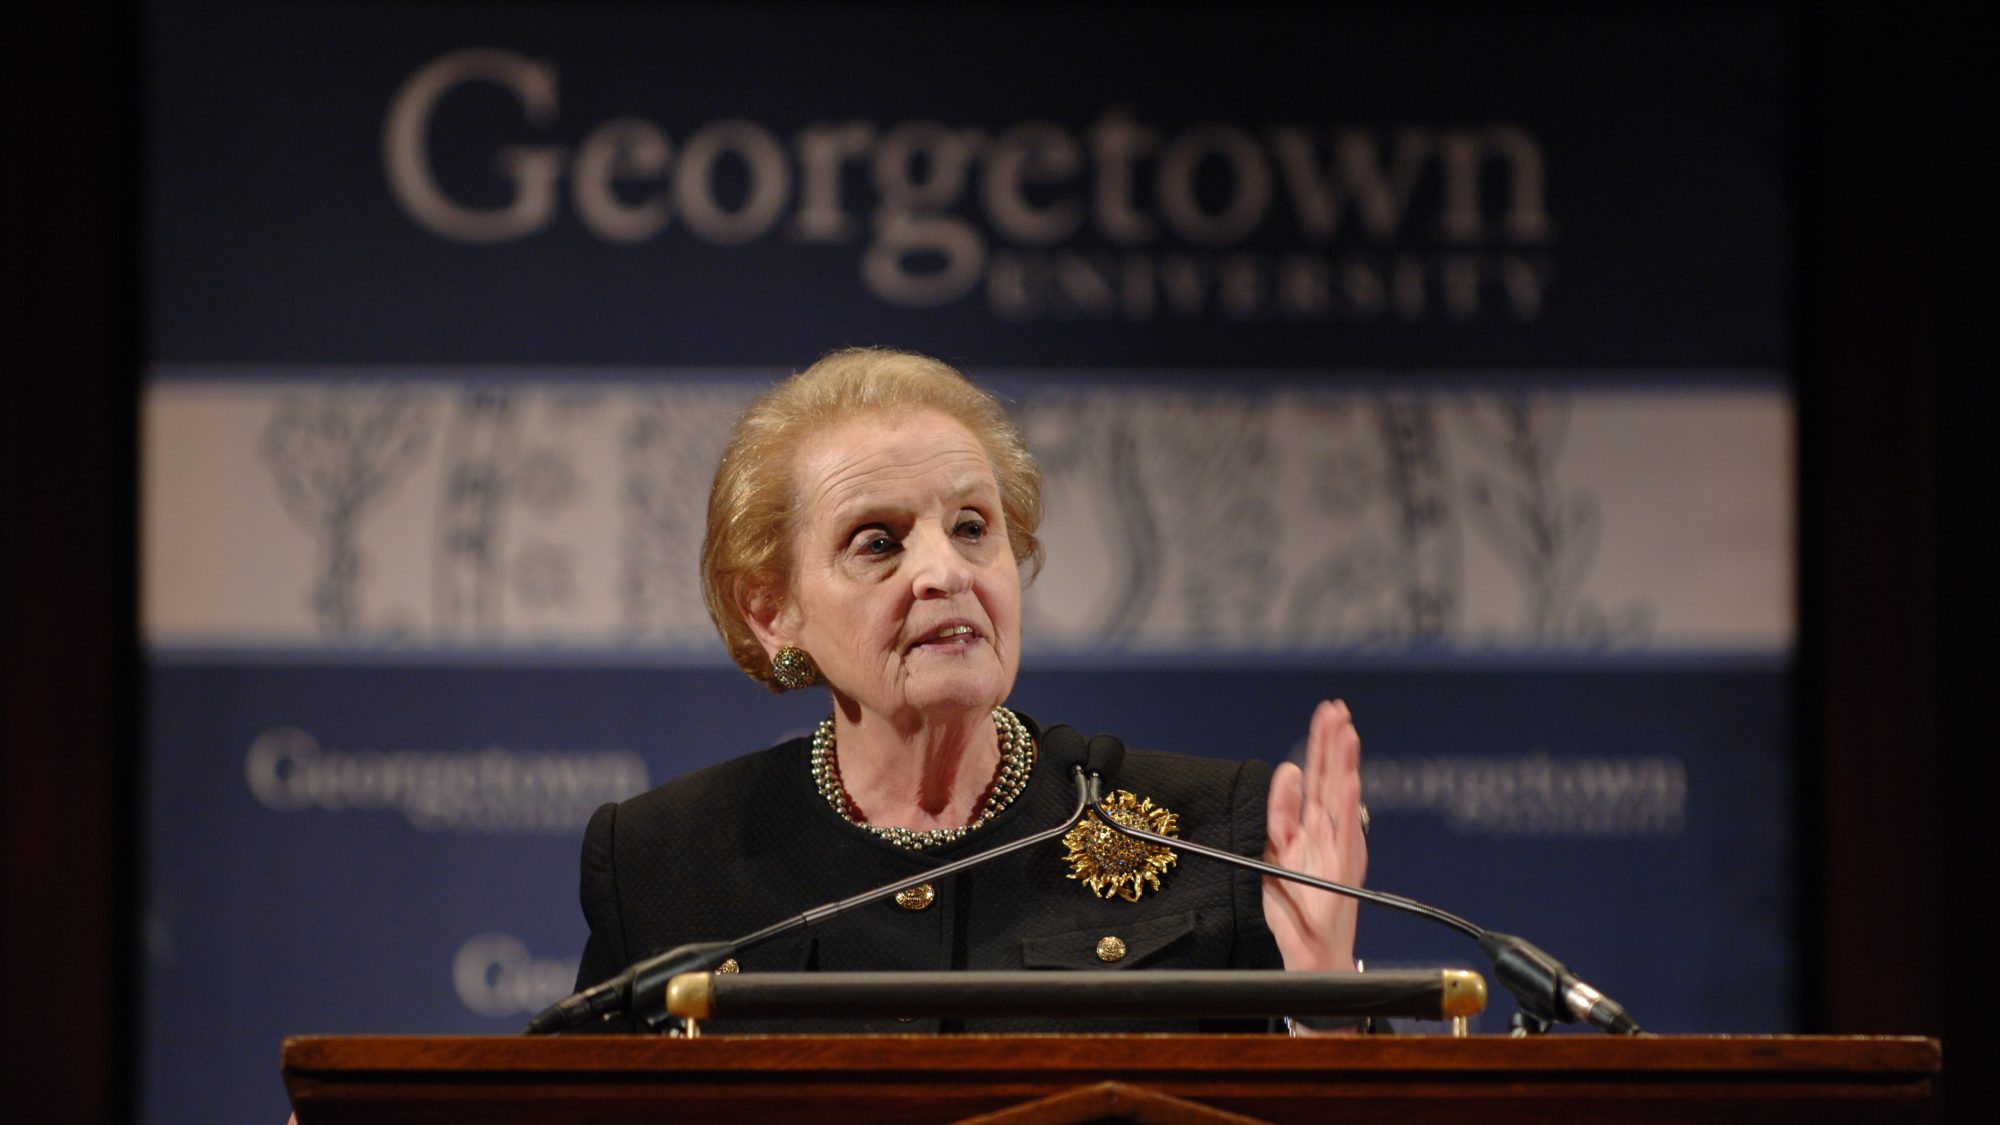 Madeleine Albright speaks behind a podium with a &quot;Georgetown&quot; sign behind her